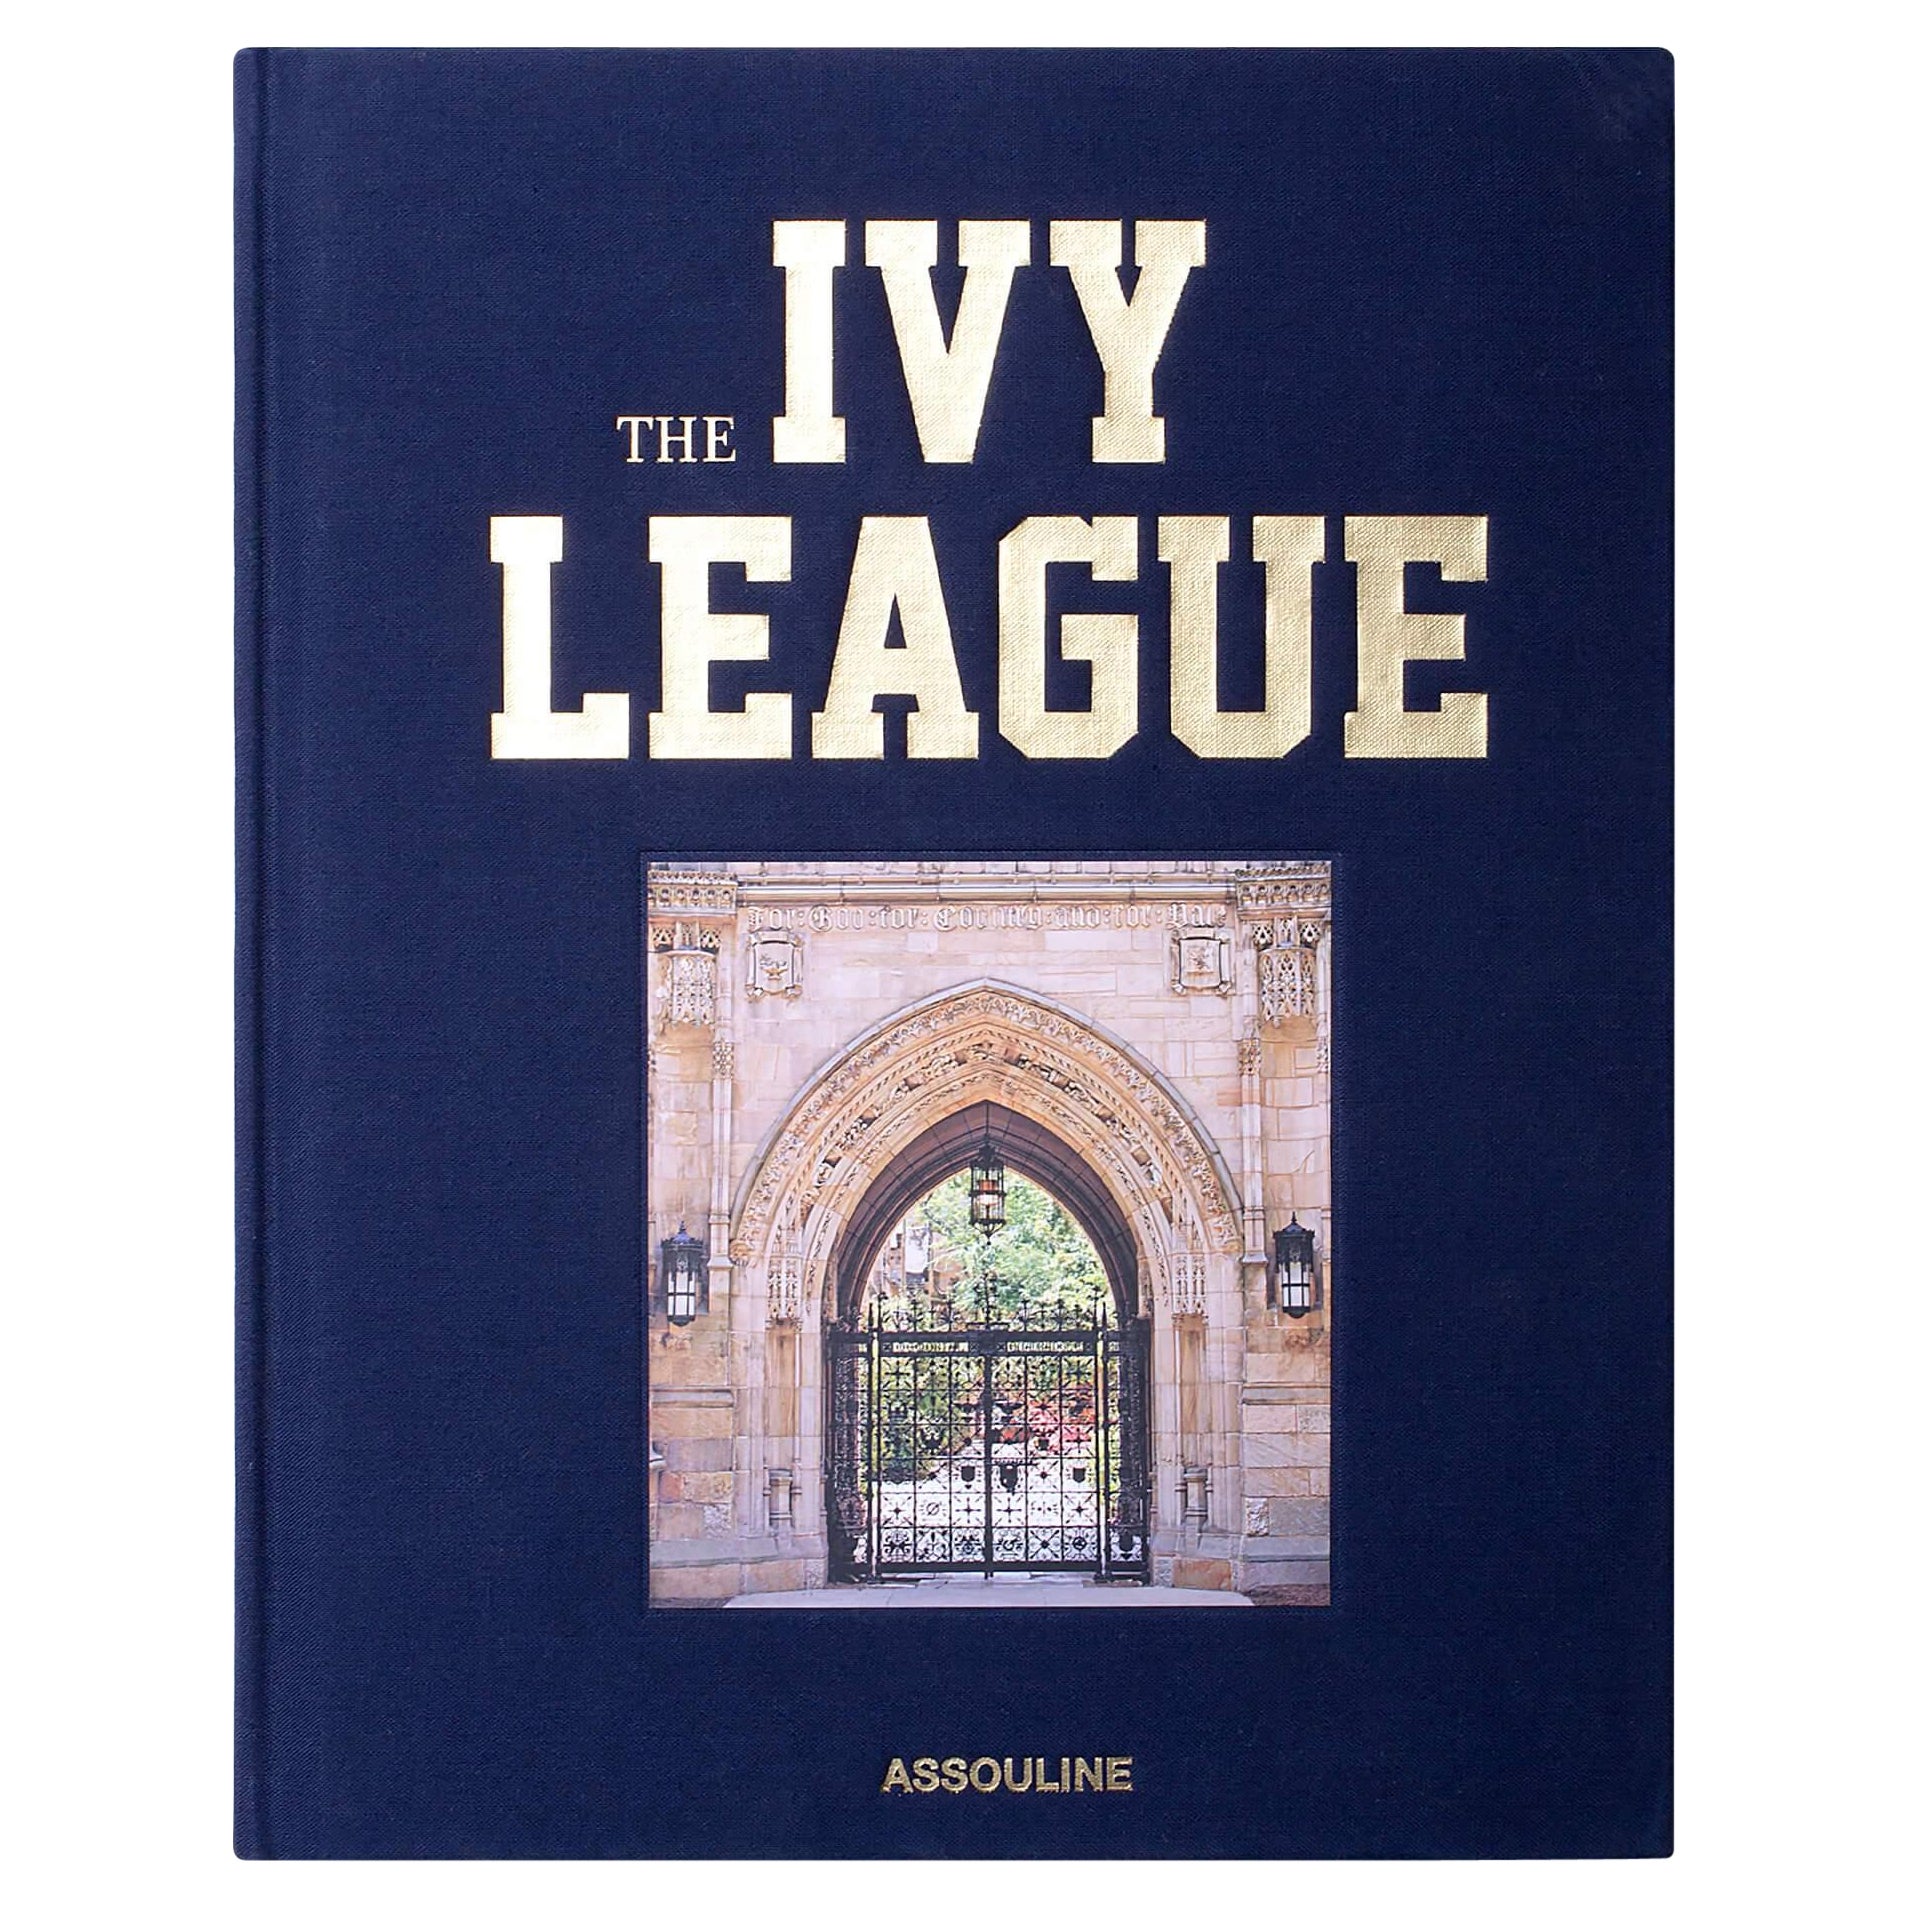 In Stock in Los Angeles, The Ivy League by Daniel Cappello